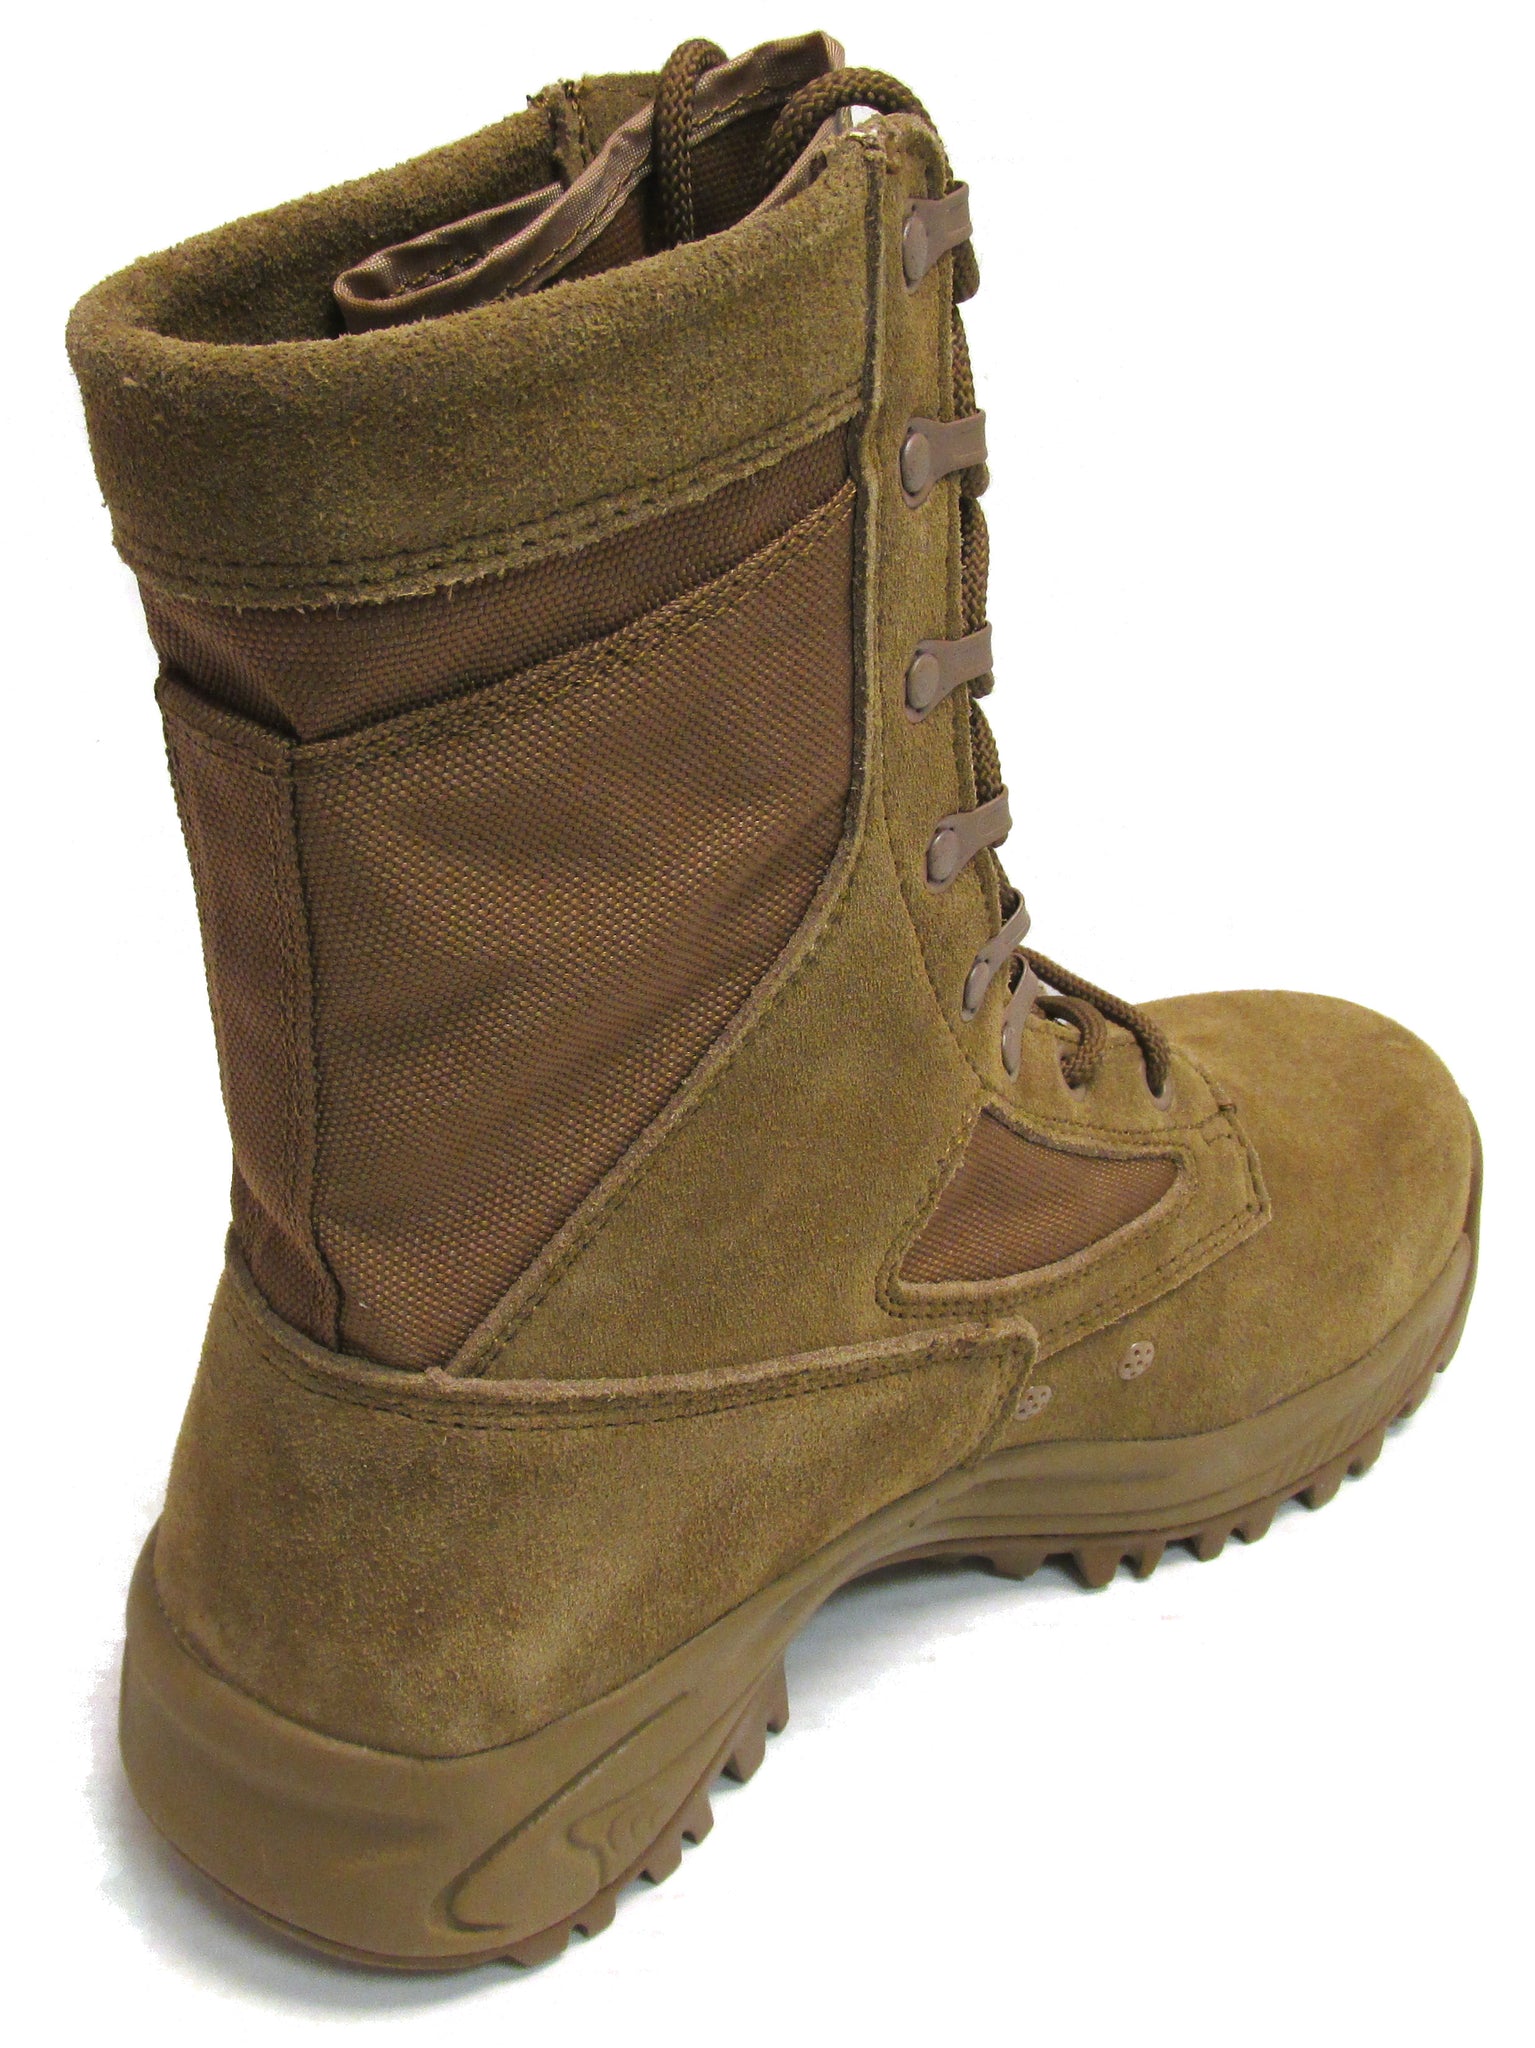 Military Uniform Supply OCP Combat Boots are a comfortable, affordable ...